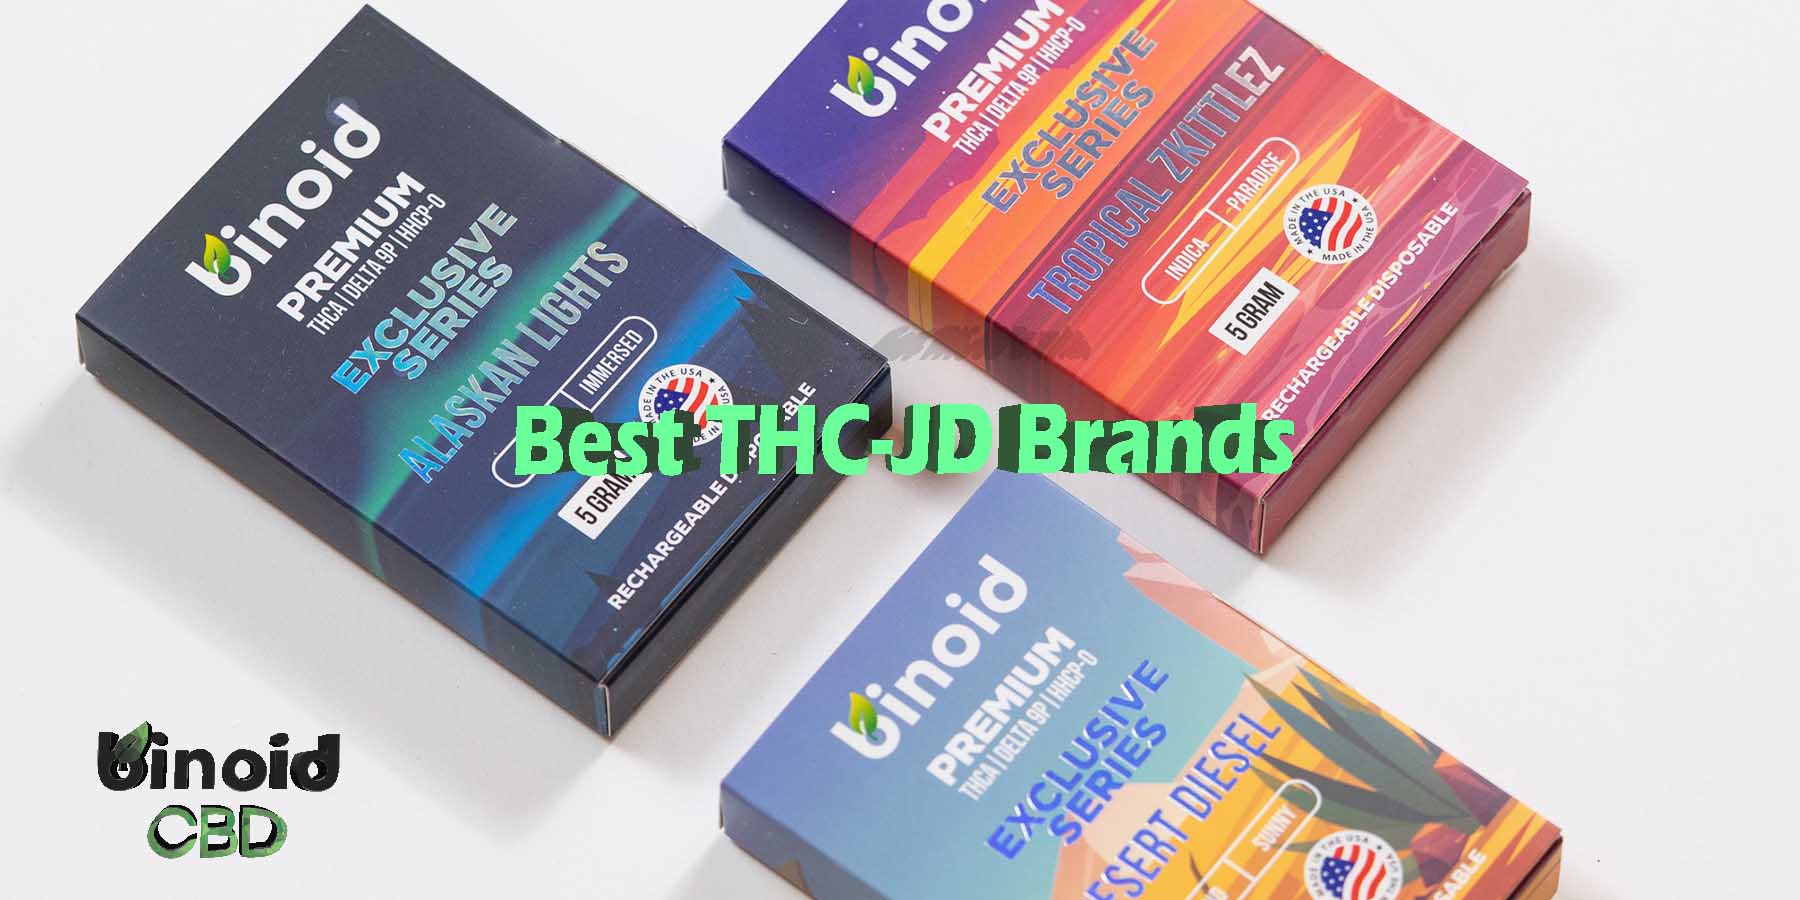 Best THC JD Brands 5 Gram Review Take Work Online Best Brand Price Get Near Me Lowest Coupon Discount Store Shop Vapes Carts Online Strongest Smoke Shop Binoid